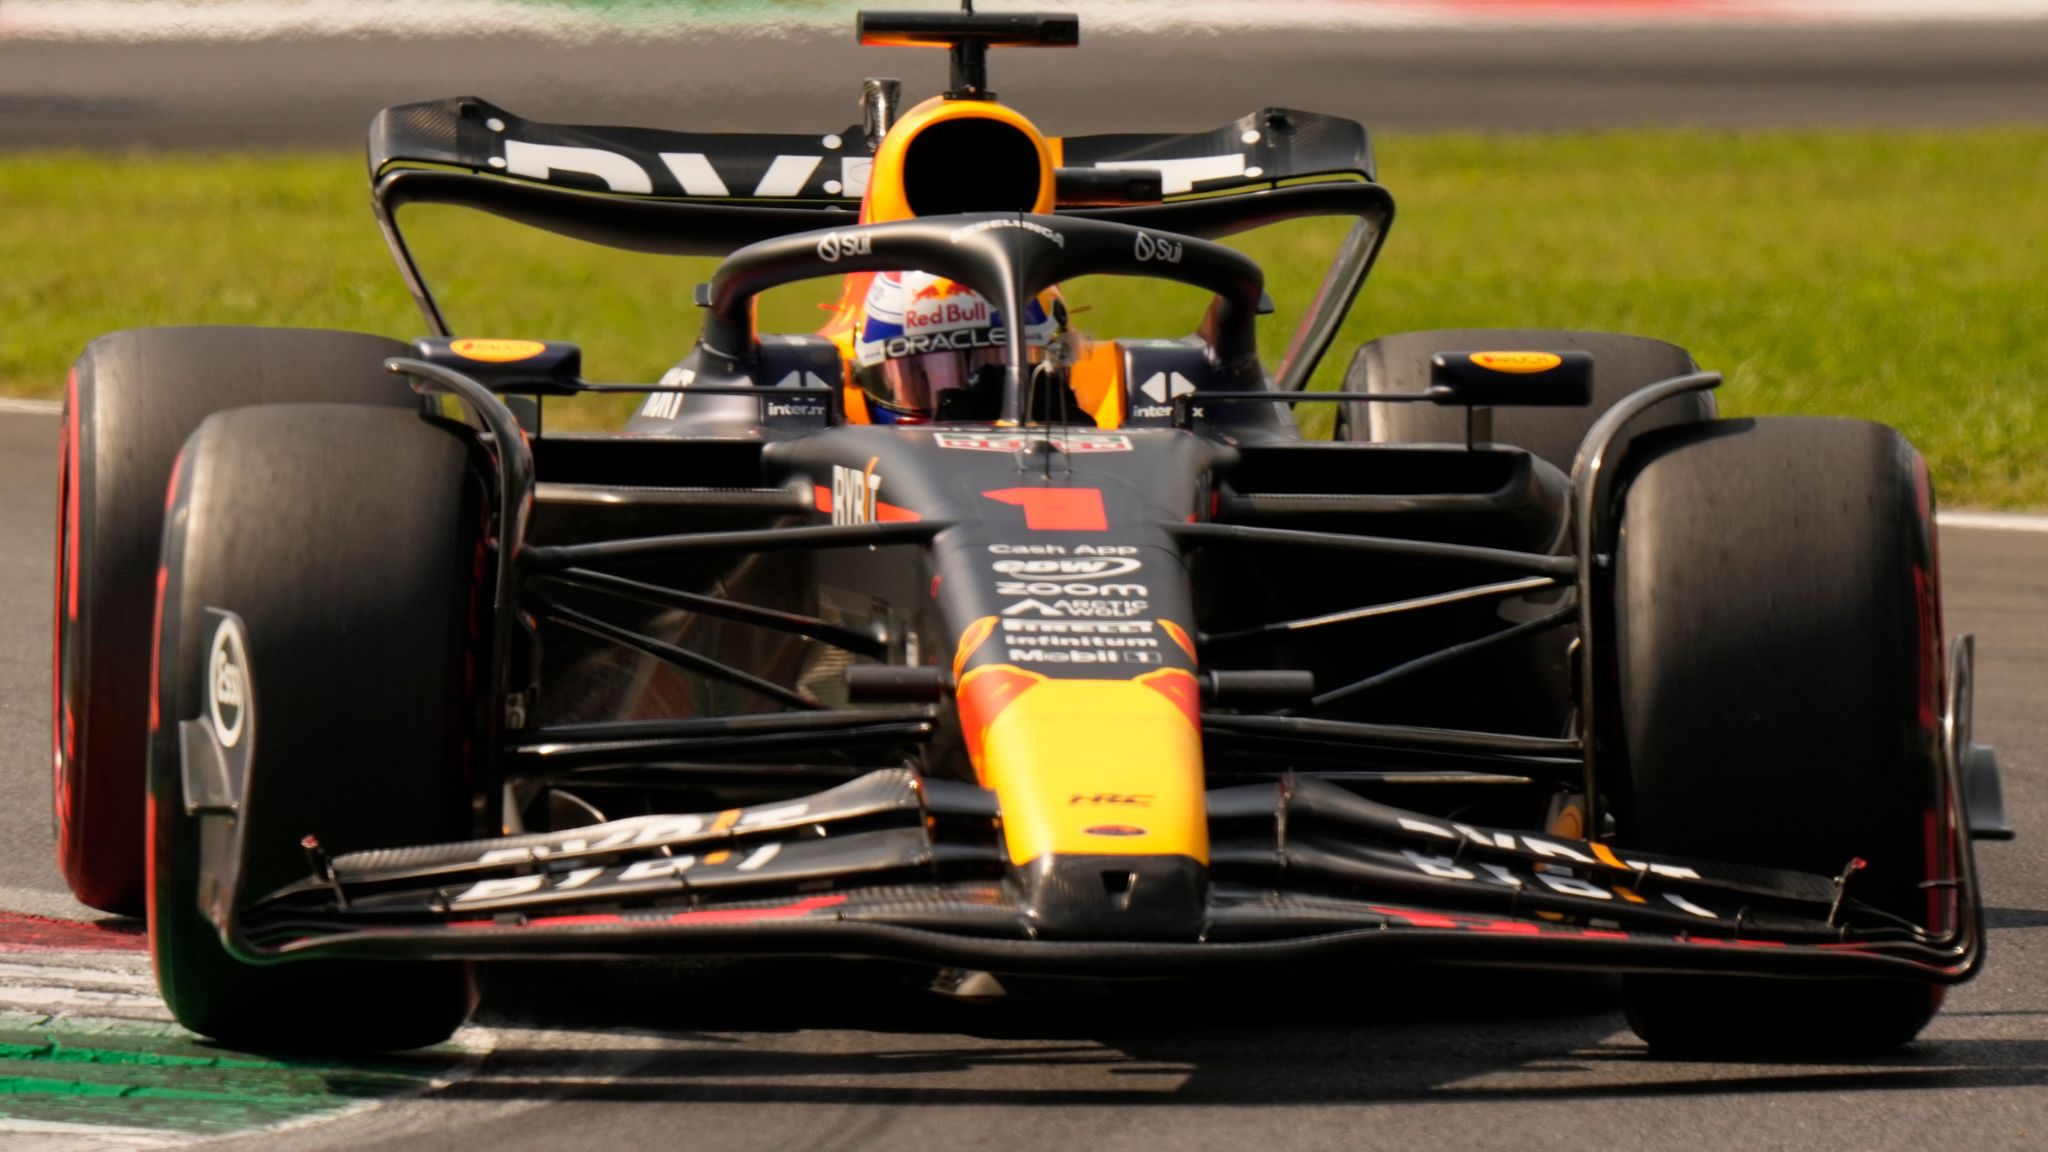 Italian GP Carlos Sainz leads Max Verstappen and Lewis Hamilton in Monza final practice ahead of qualifying F1 News